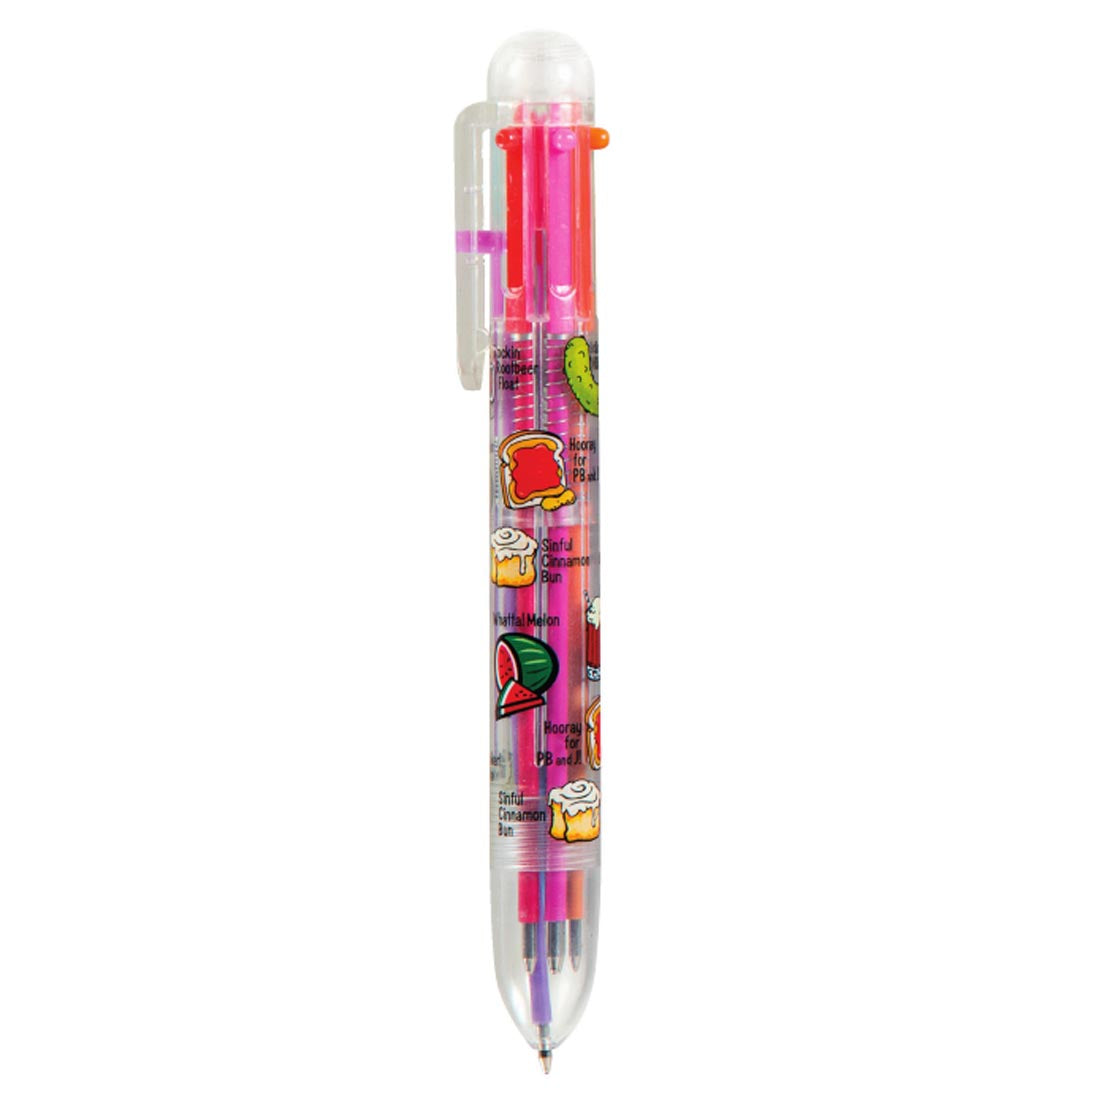 Scent-Sibles 6-Color Multicolor Pen Set With Scented Ink 1 Count –